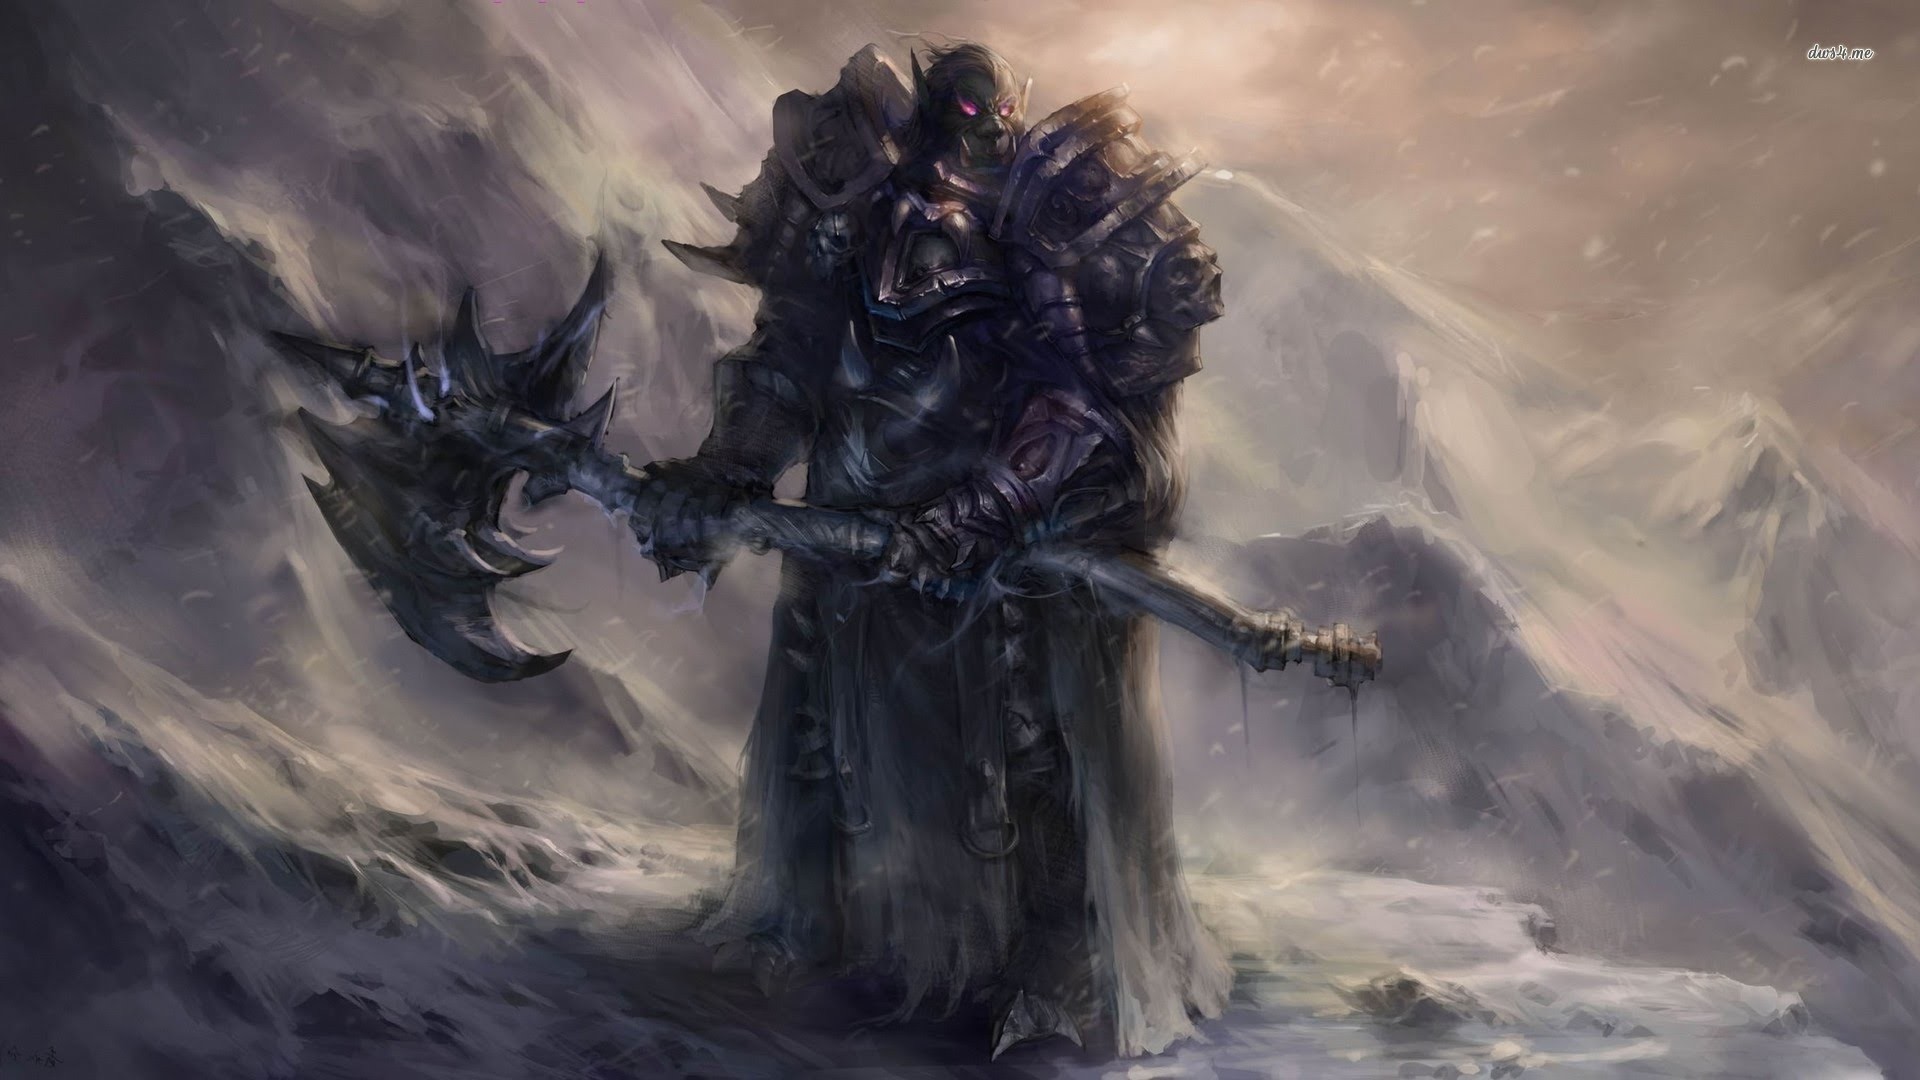 1920x1080 World of Warcraft Unholy Death Knight PVE Guide 6.1 .